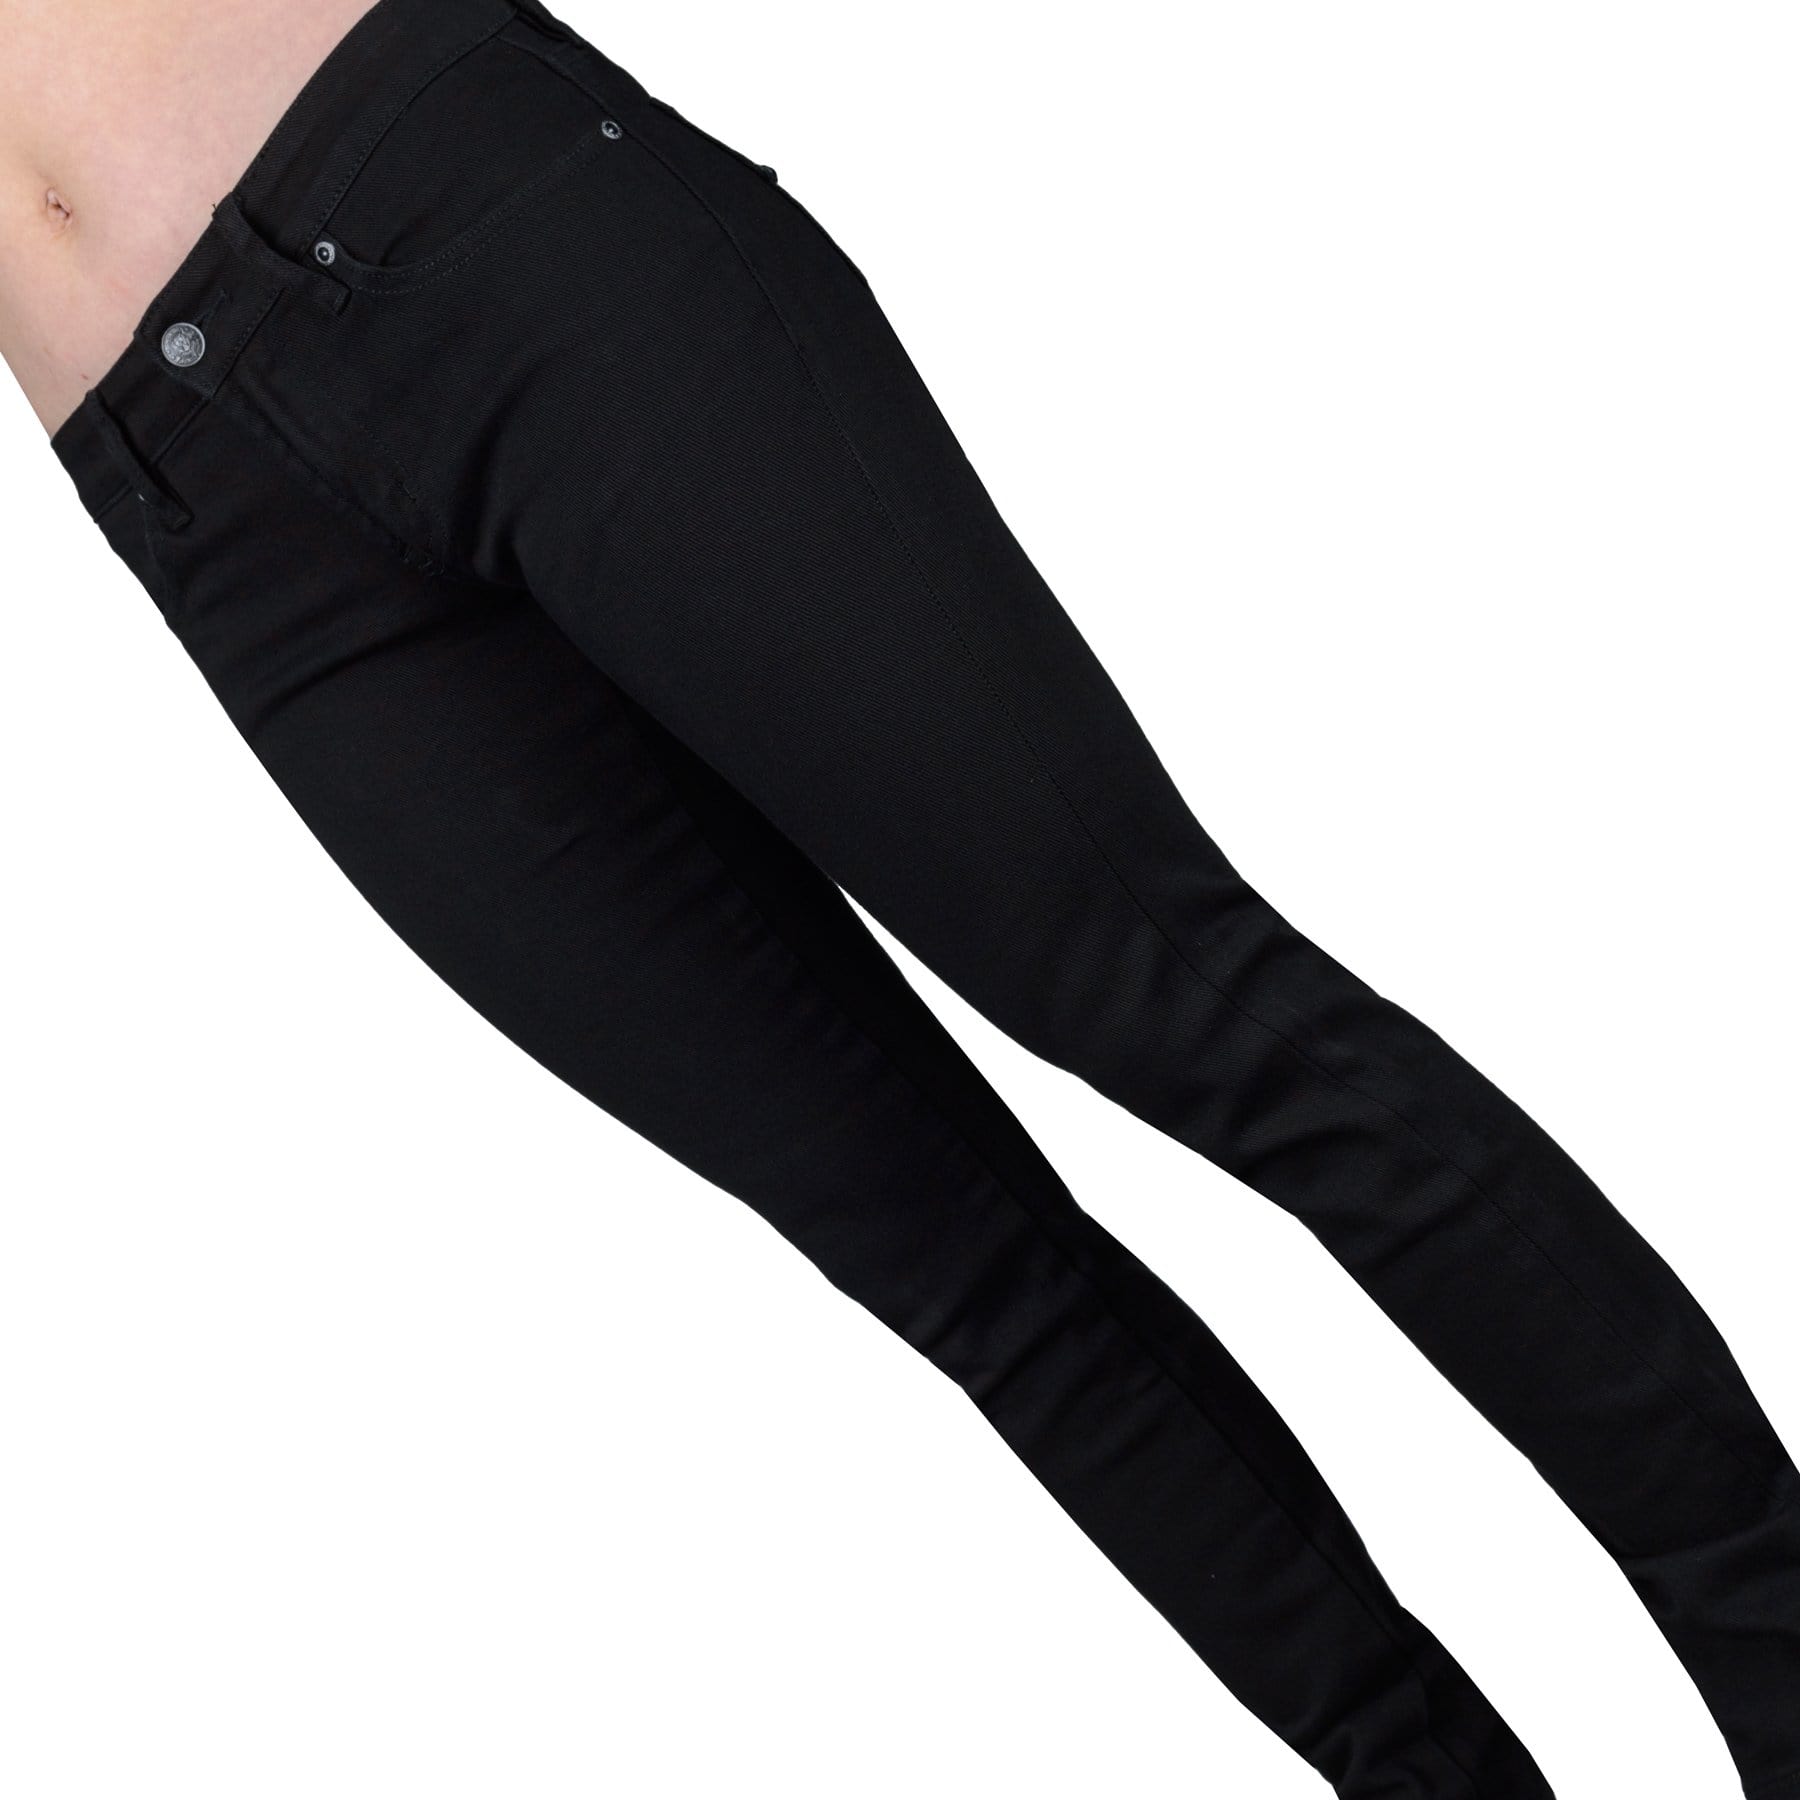 Essentials Collection Pants Rampager Unisex Jeans - Black